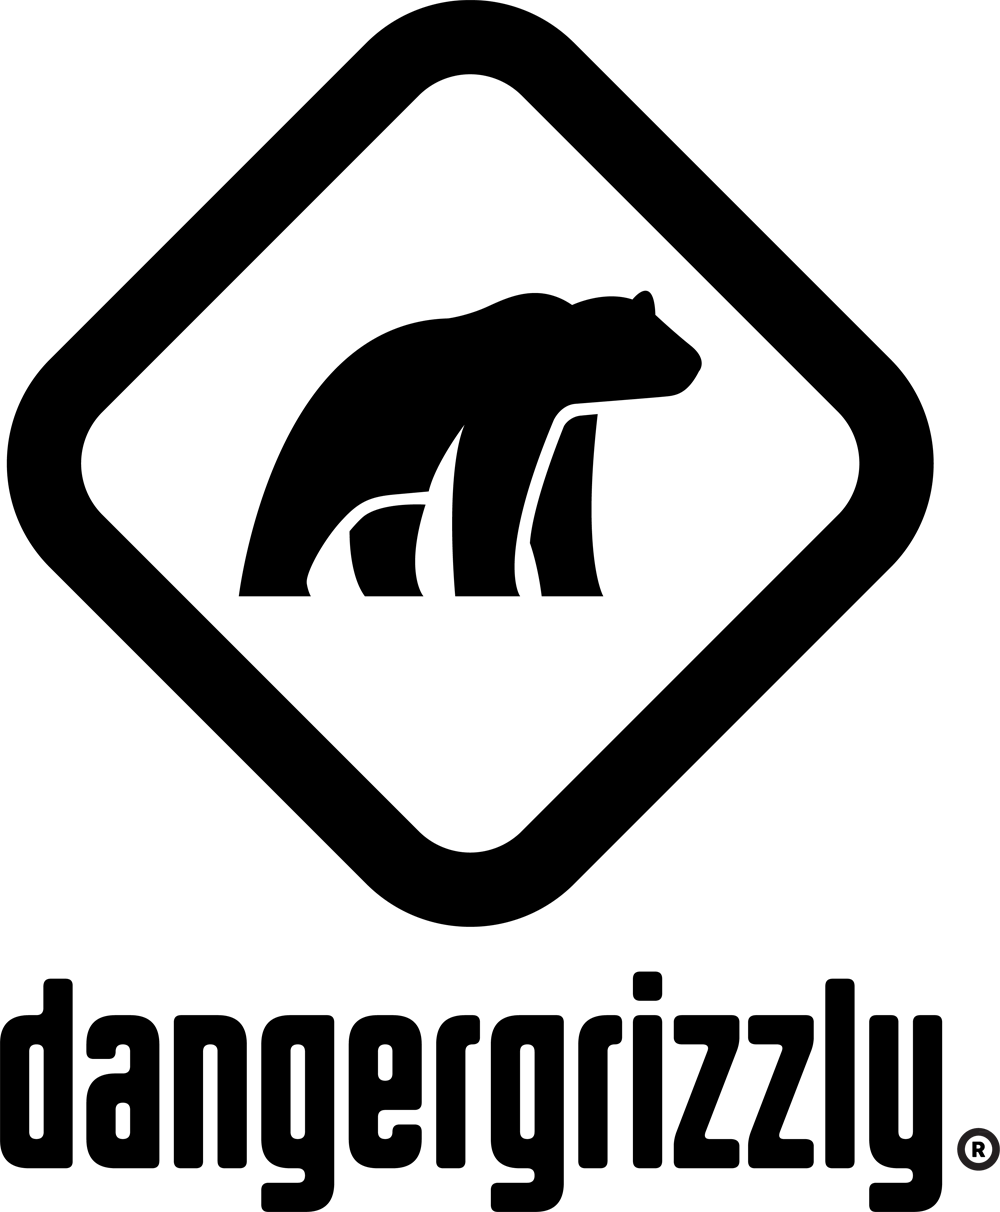 DANGERGRIZZLY